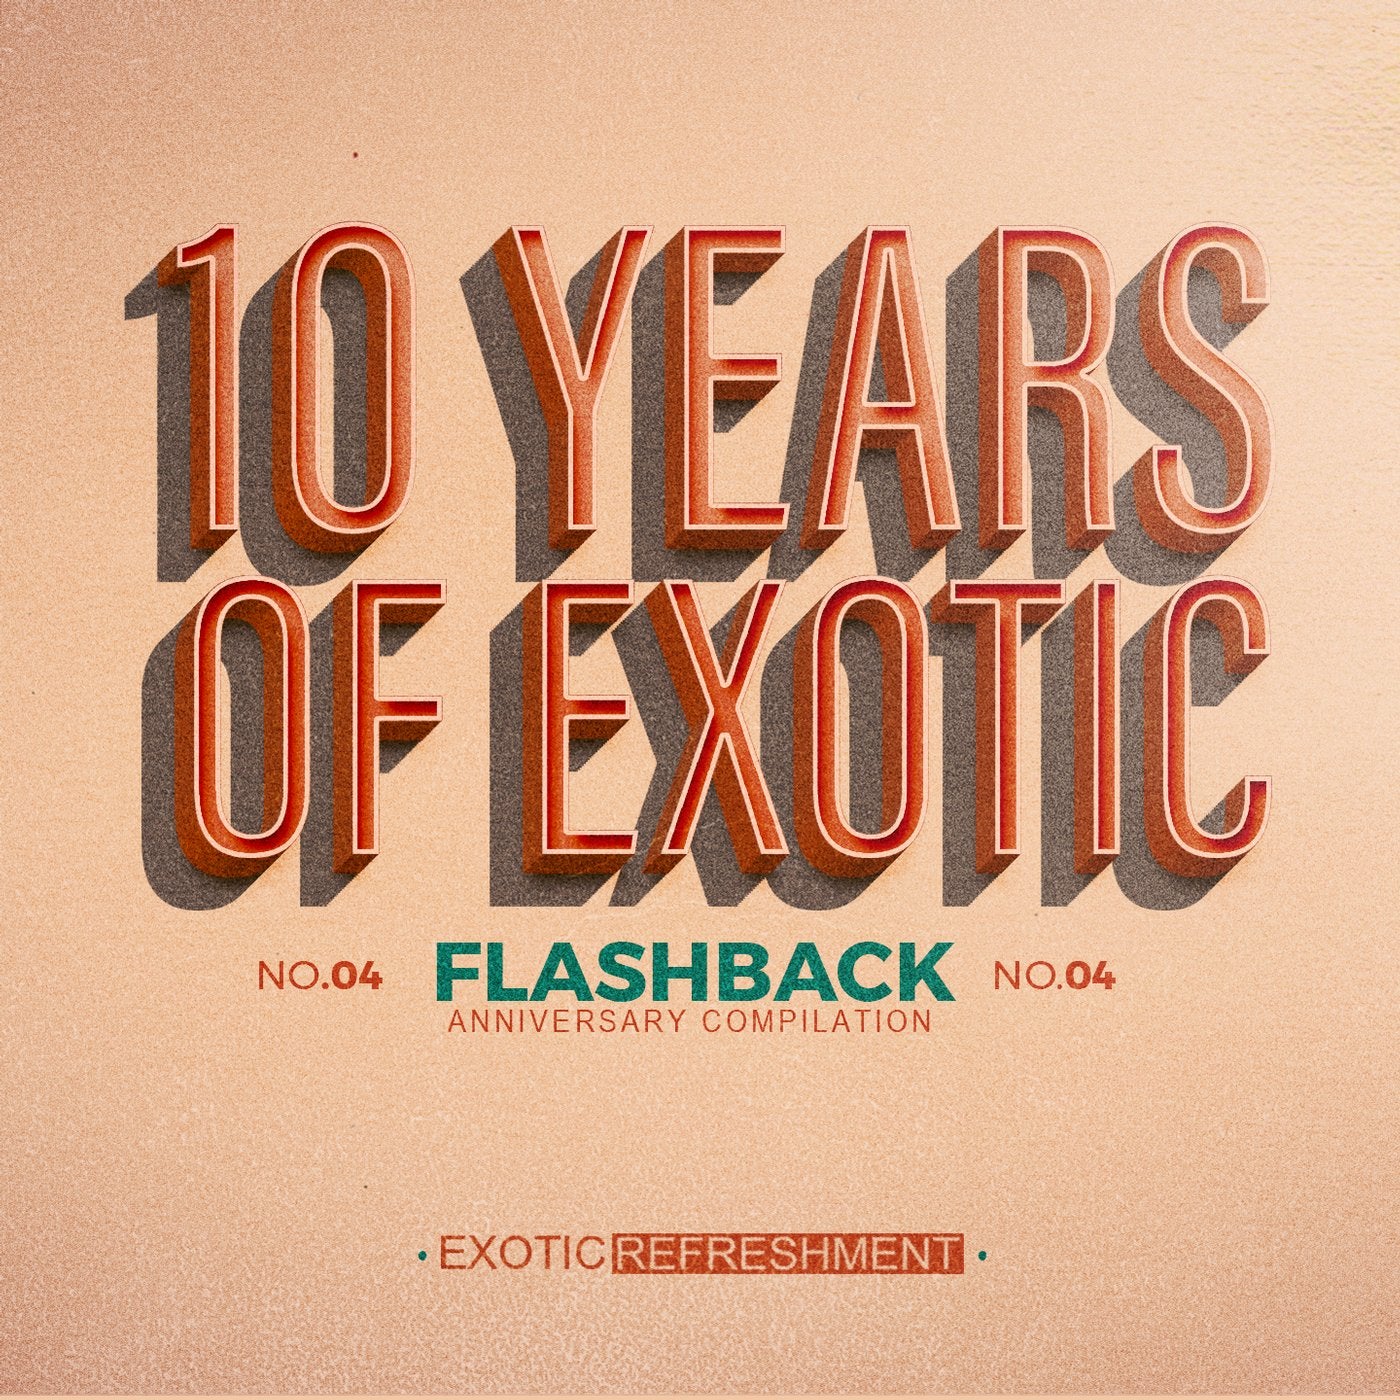 10 Years Of Exotic - Flashback Part 2